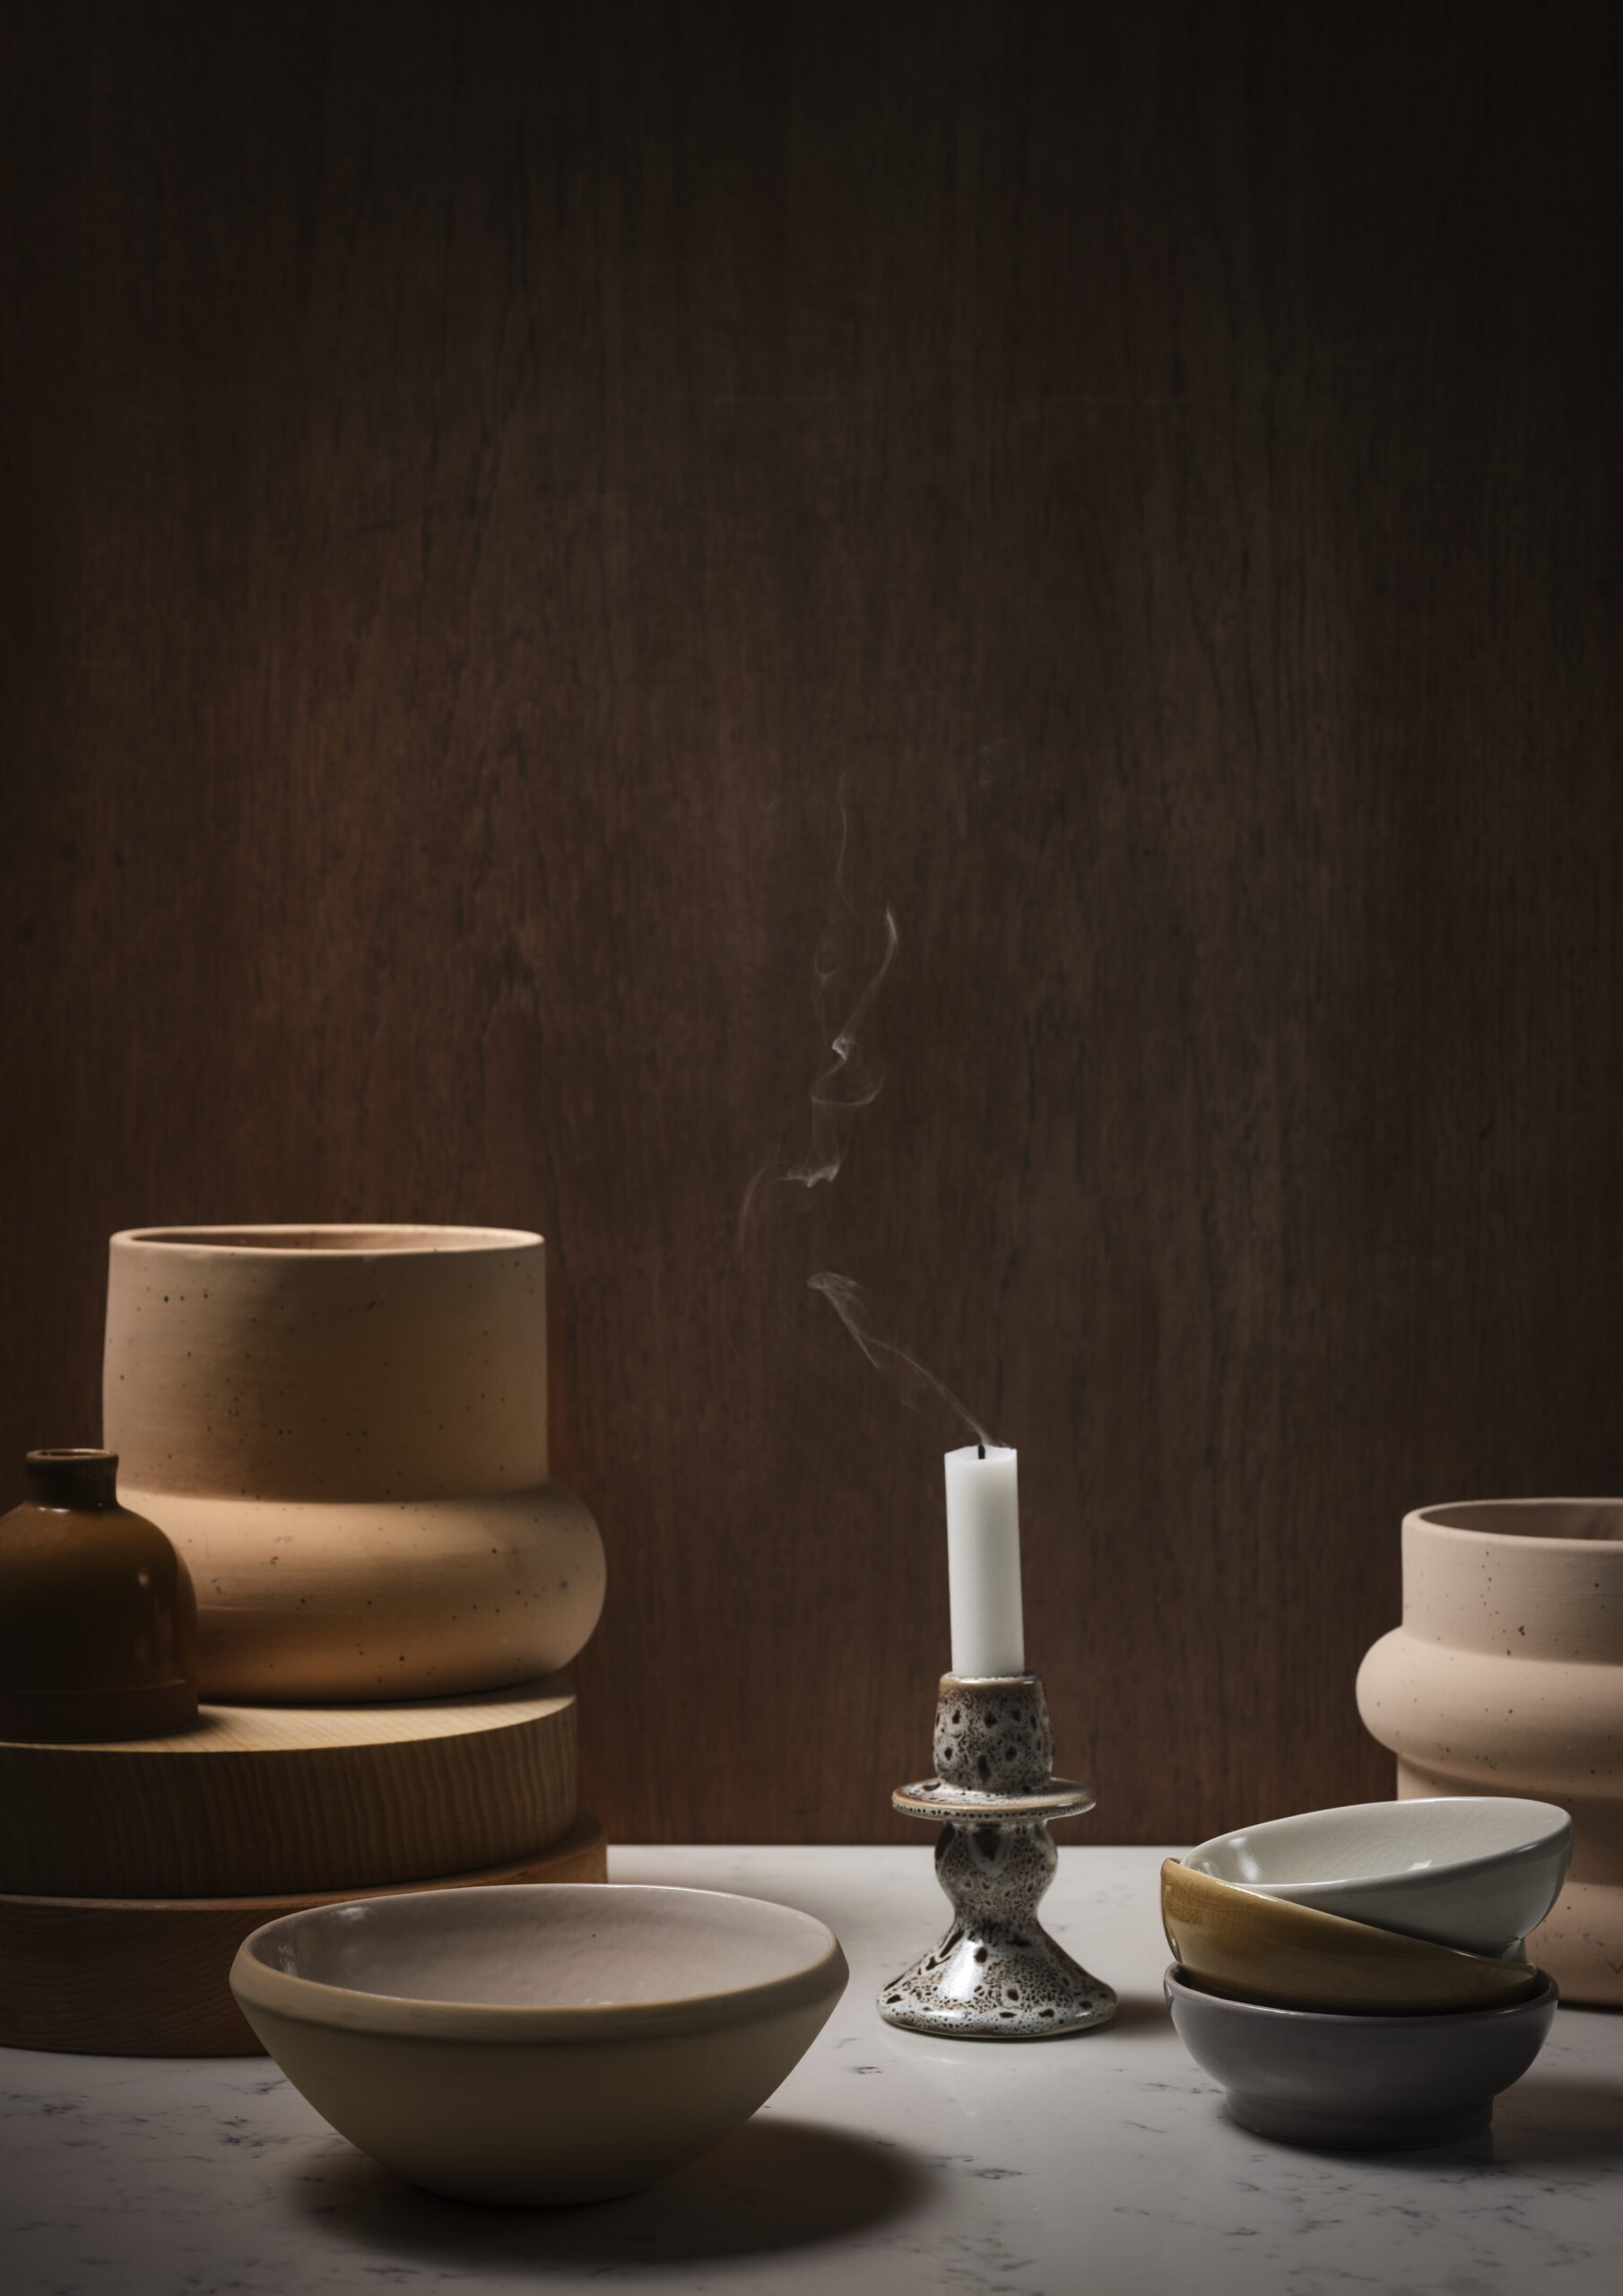 At The Kitchen | Still life bowls and candle